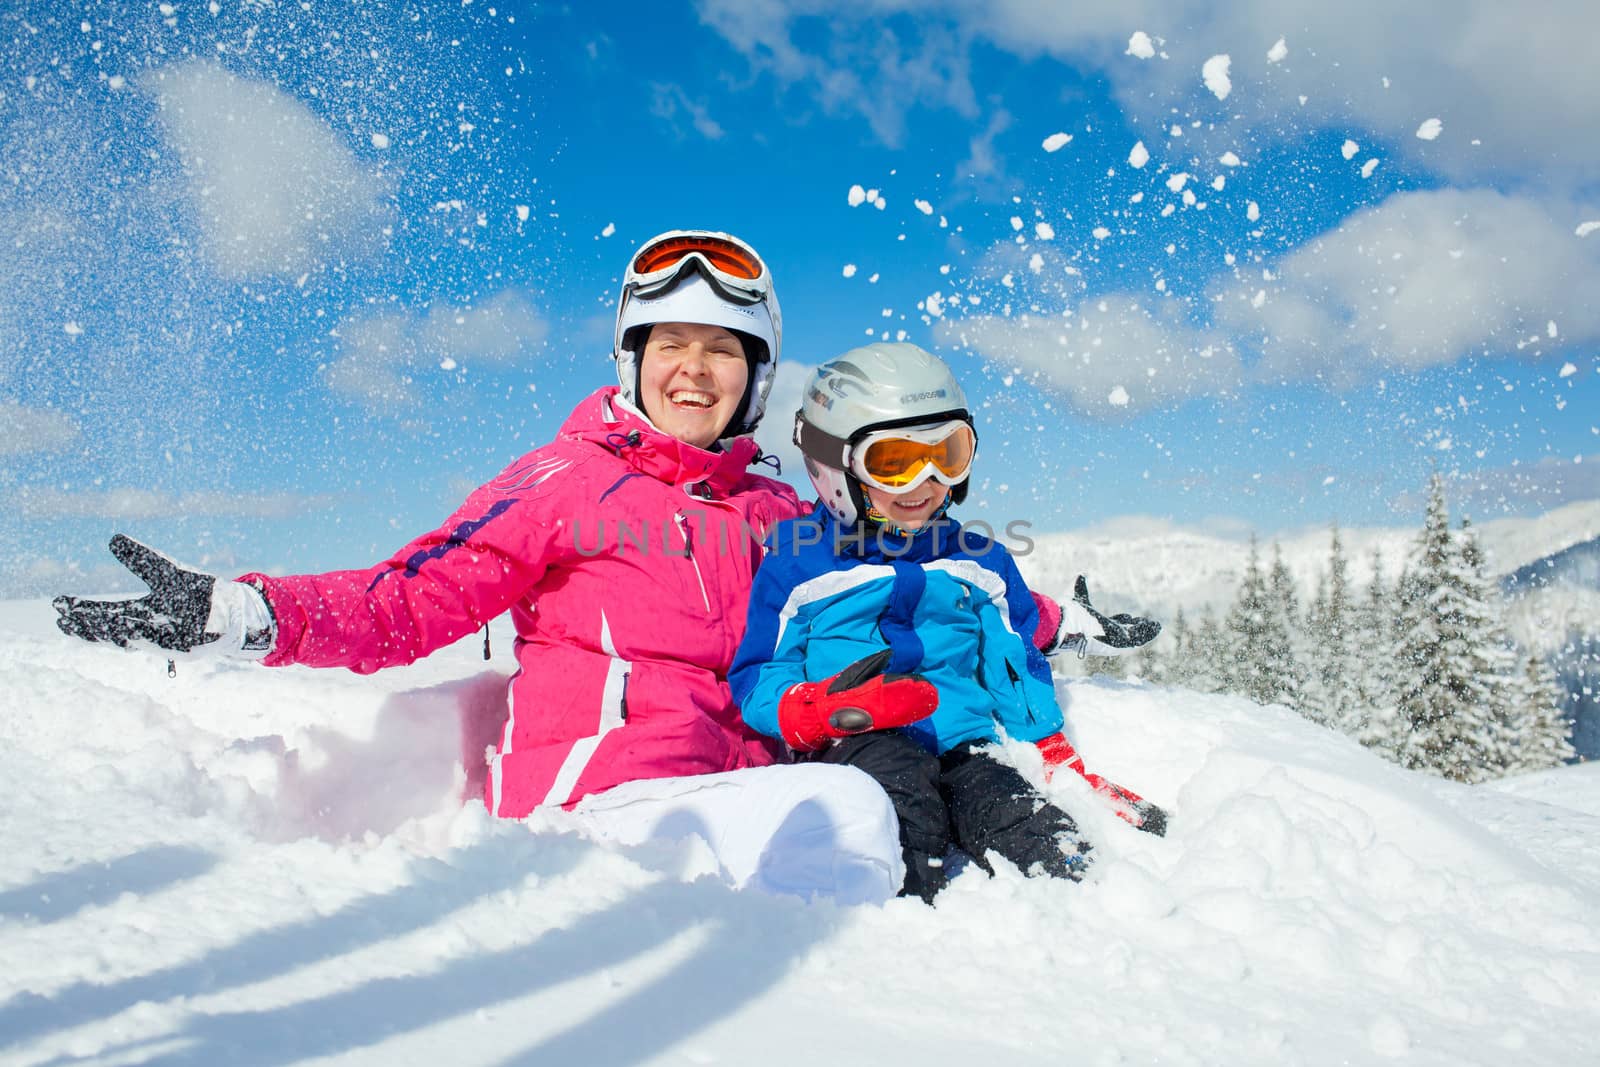 Skiing, winter, family - smiling boy in ski goggles and a helmet with his mother playing in snow in winter resort